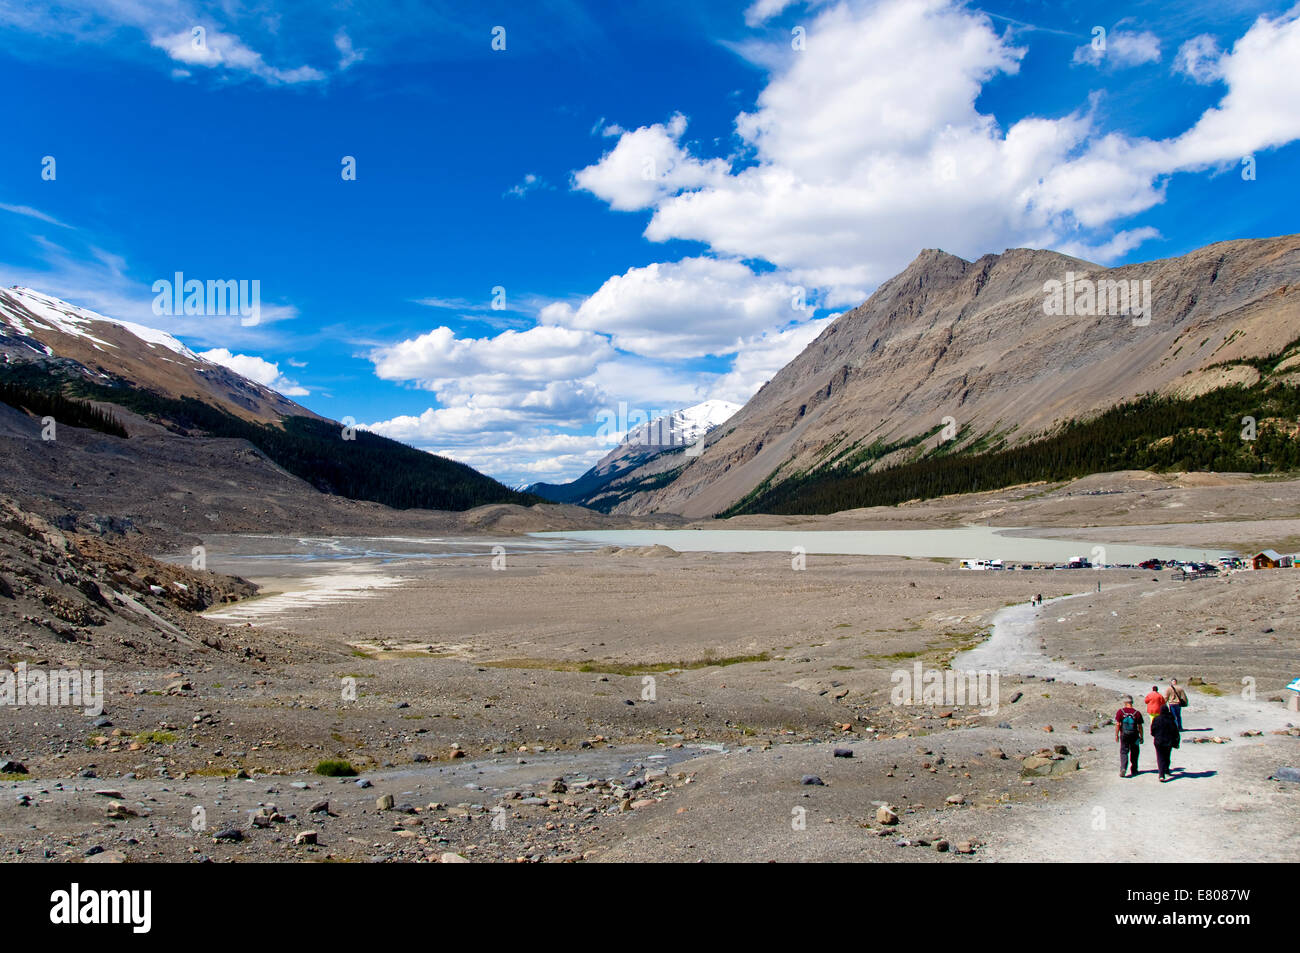 Il Columbia Icefield, Icefields Parkway, Banff, Alberta, Canada Foto Stock